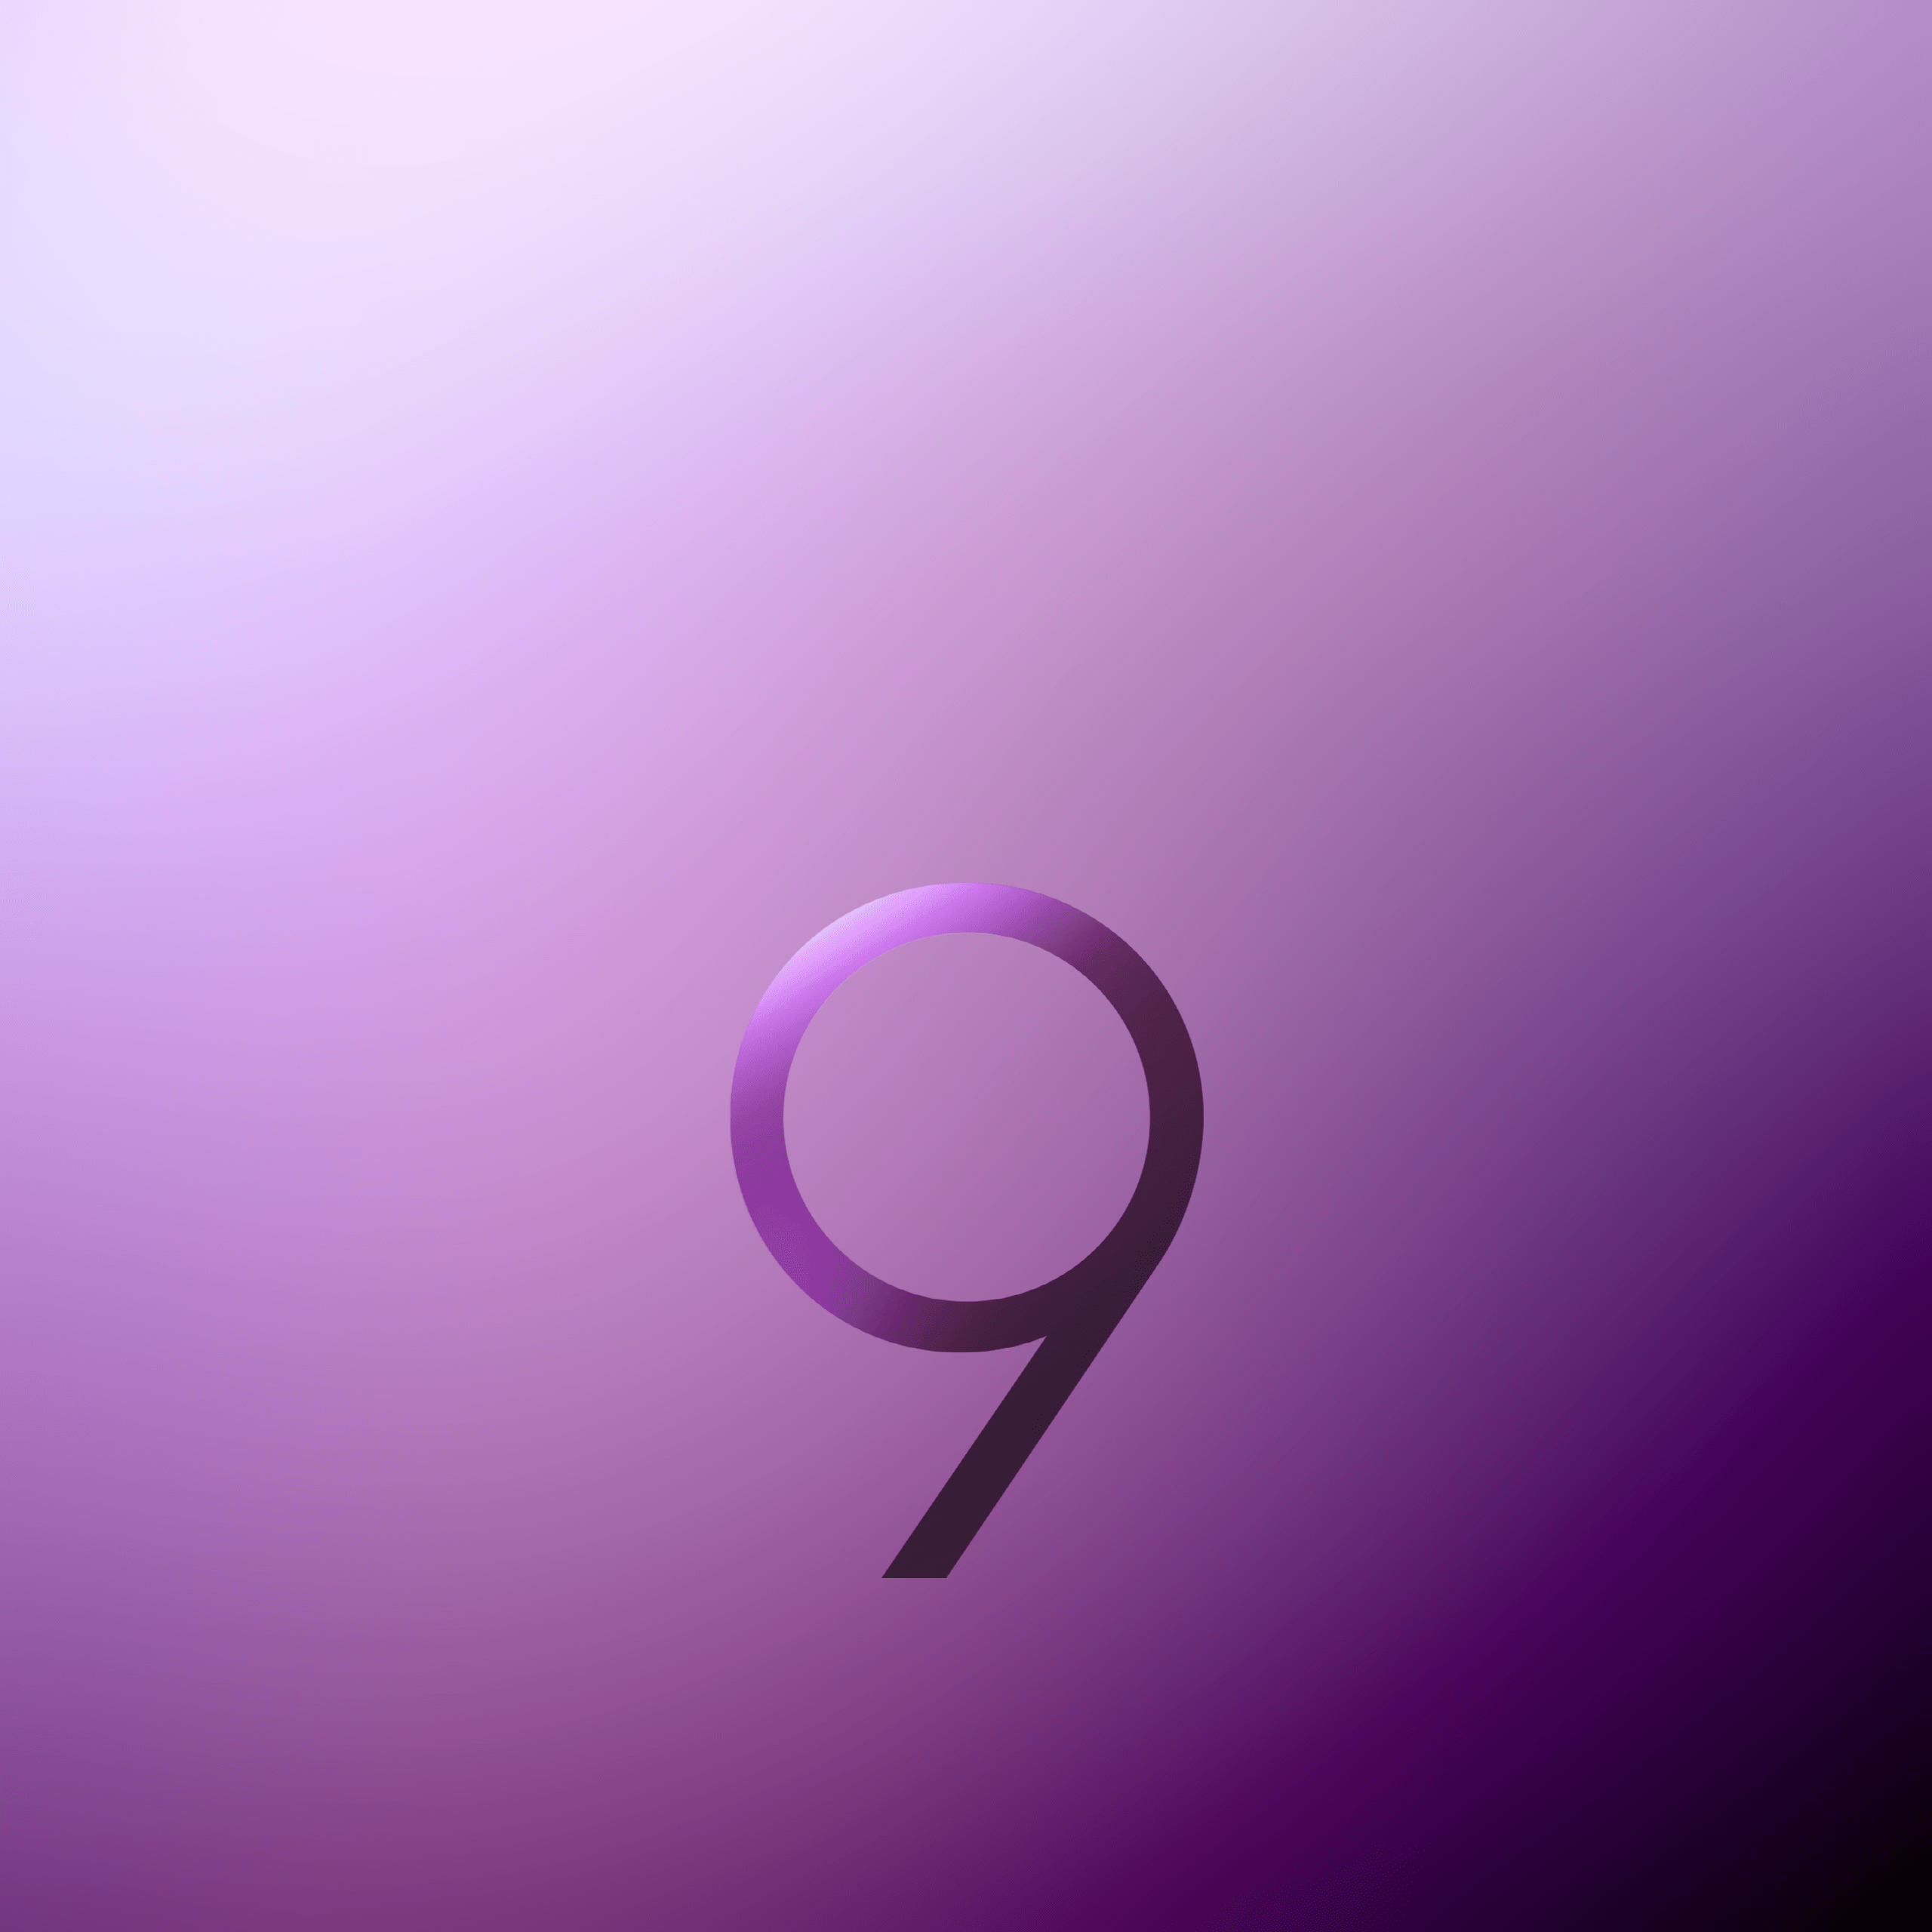 Official Galaxy S9 wallpaper now available—download 'em here